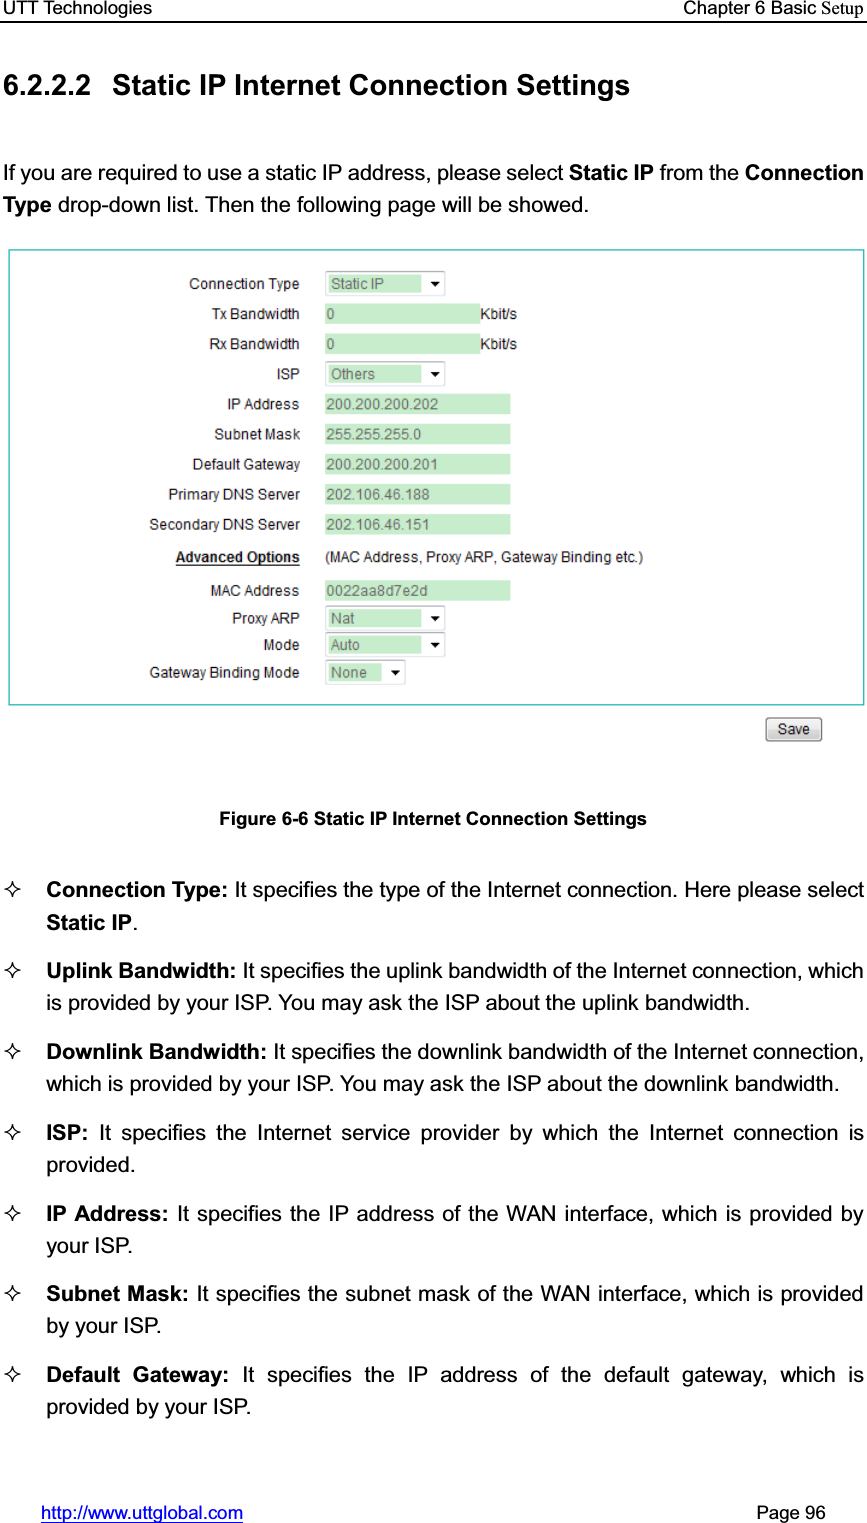 UTT Technologies    Chapter 6 Basic Setuphttp://www.uttglobal.com                                                       Page 96 6.2.2.2  Static IP Internet Connection Settings If you are required to use a static IP address, please select Static IP from the Connection Type drop-down list. Then the following page will be showed. Figure 6-6 Static IP Internet Connection Settings Connection Type: It specifies the type of the Internet connection. Here please select Static IP.Uplink Bandwidth: It specifies the uplink bandwidth of the Internet connection, which is provided by your ISP. You may ask the ISP about the uplink bandwidth. Downlink Bandwidth: It specifies the downlink bandwidth of the Internet connection, which is provided by your ISP. You may ask the ISP about the downlink bandwidth. ISP: It specifies the Internet service provider by which the Internet connection is provided. IP Address: It specifies the IP address of the WAN interface, which is provided by your ISP. Subnet Mask: It specifies the subnet mask of the WAN interface, which is provided by your ISP. Default Gateway: It specifies the IP address of the default gateway, which is provided by your ISP. 